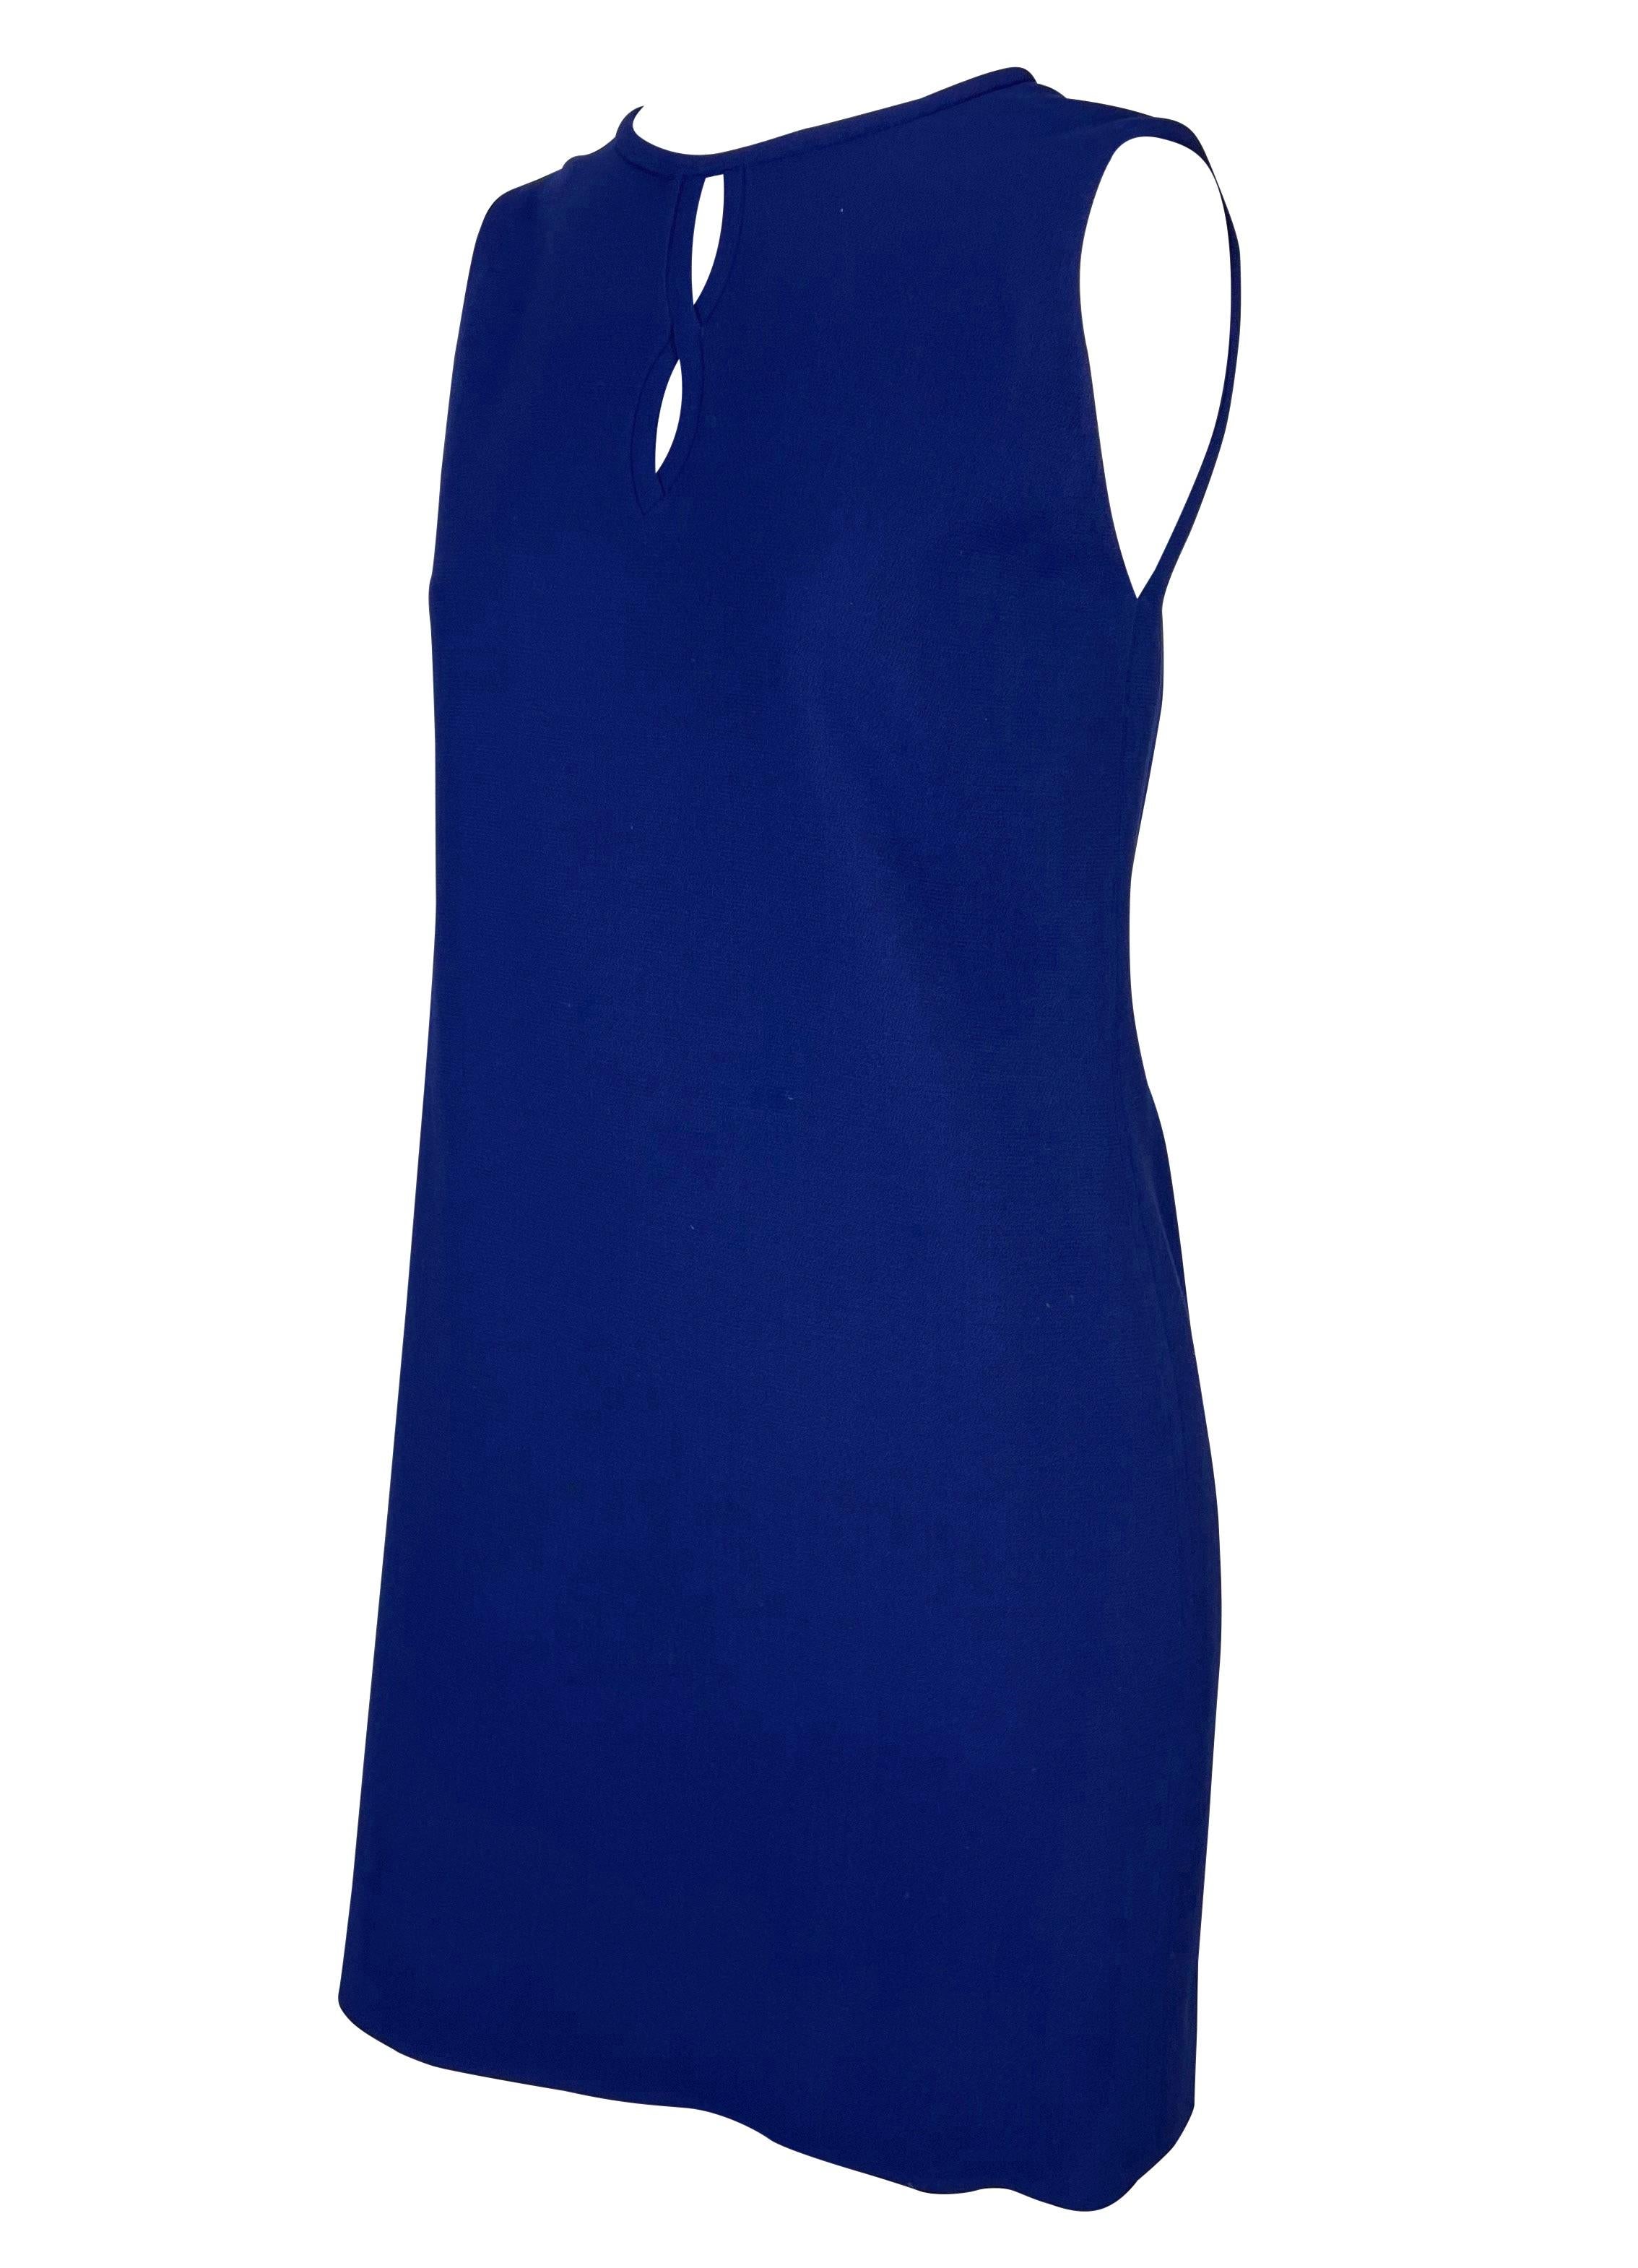 Presenting a fabulous royal blue Gianni Versace Couture dress, designed by Gianni Versace. From the Fall/Winter 1997 collection, this beautiful sleeveless wool stretch dress is made complete with a keyhole cutout at the bust. Add this gorgeous